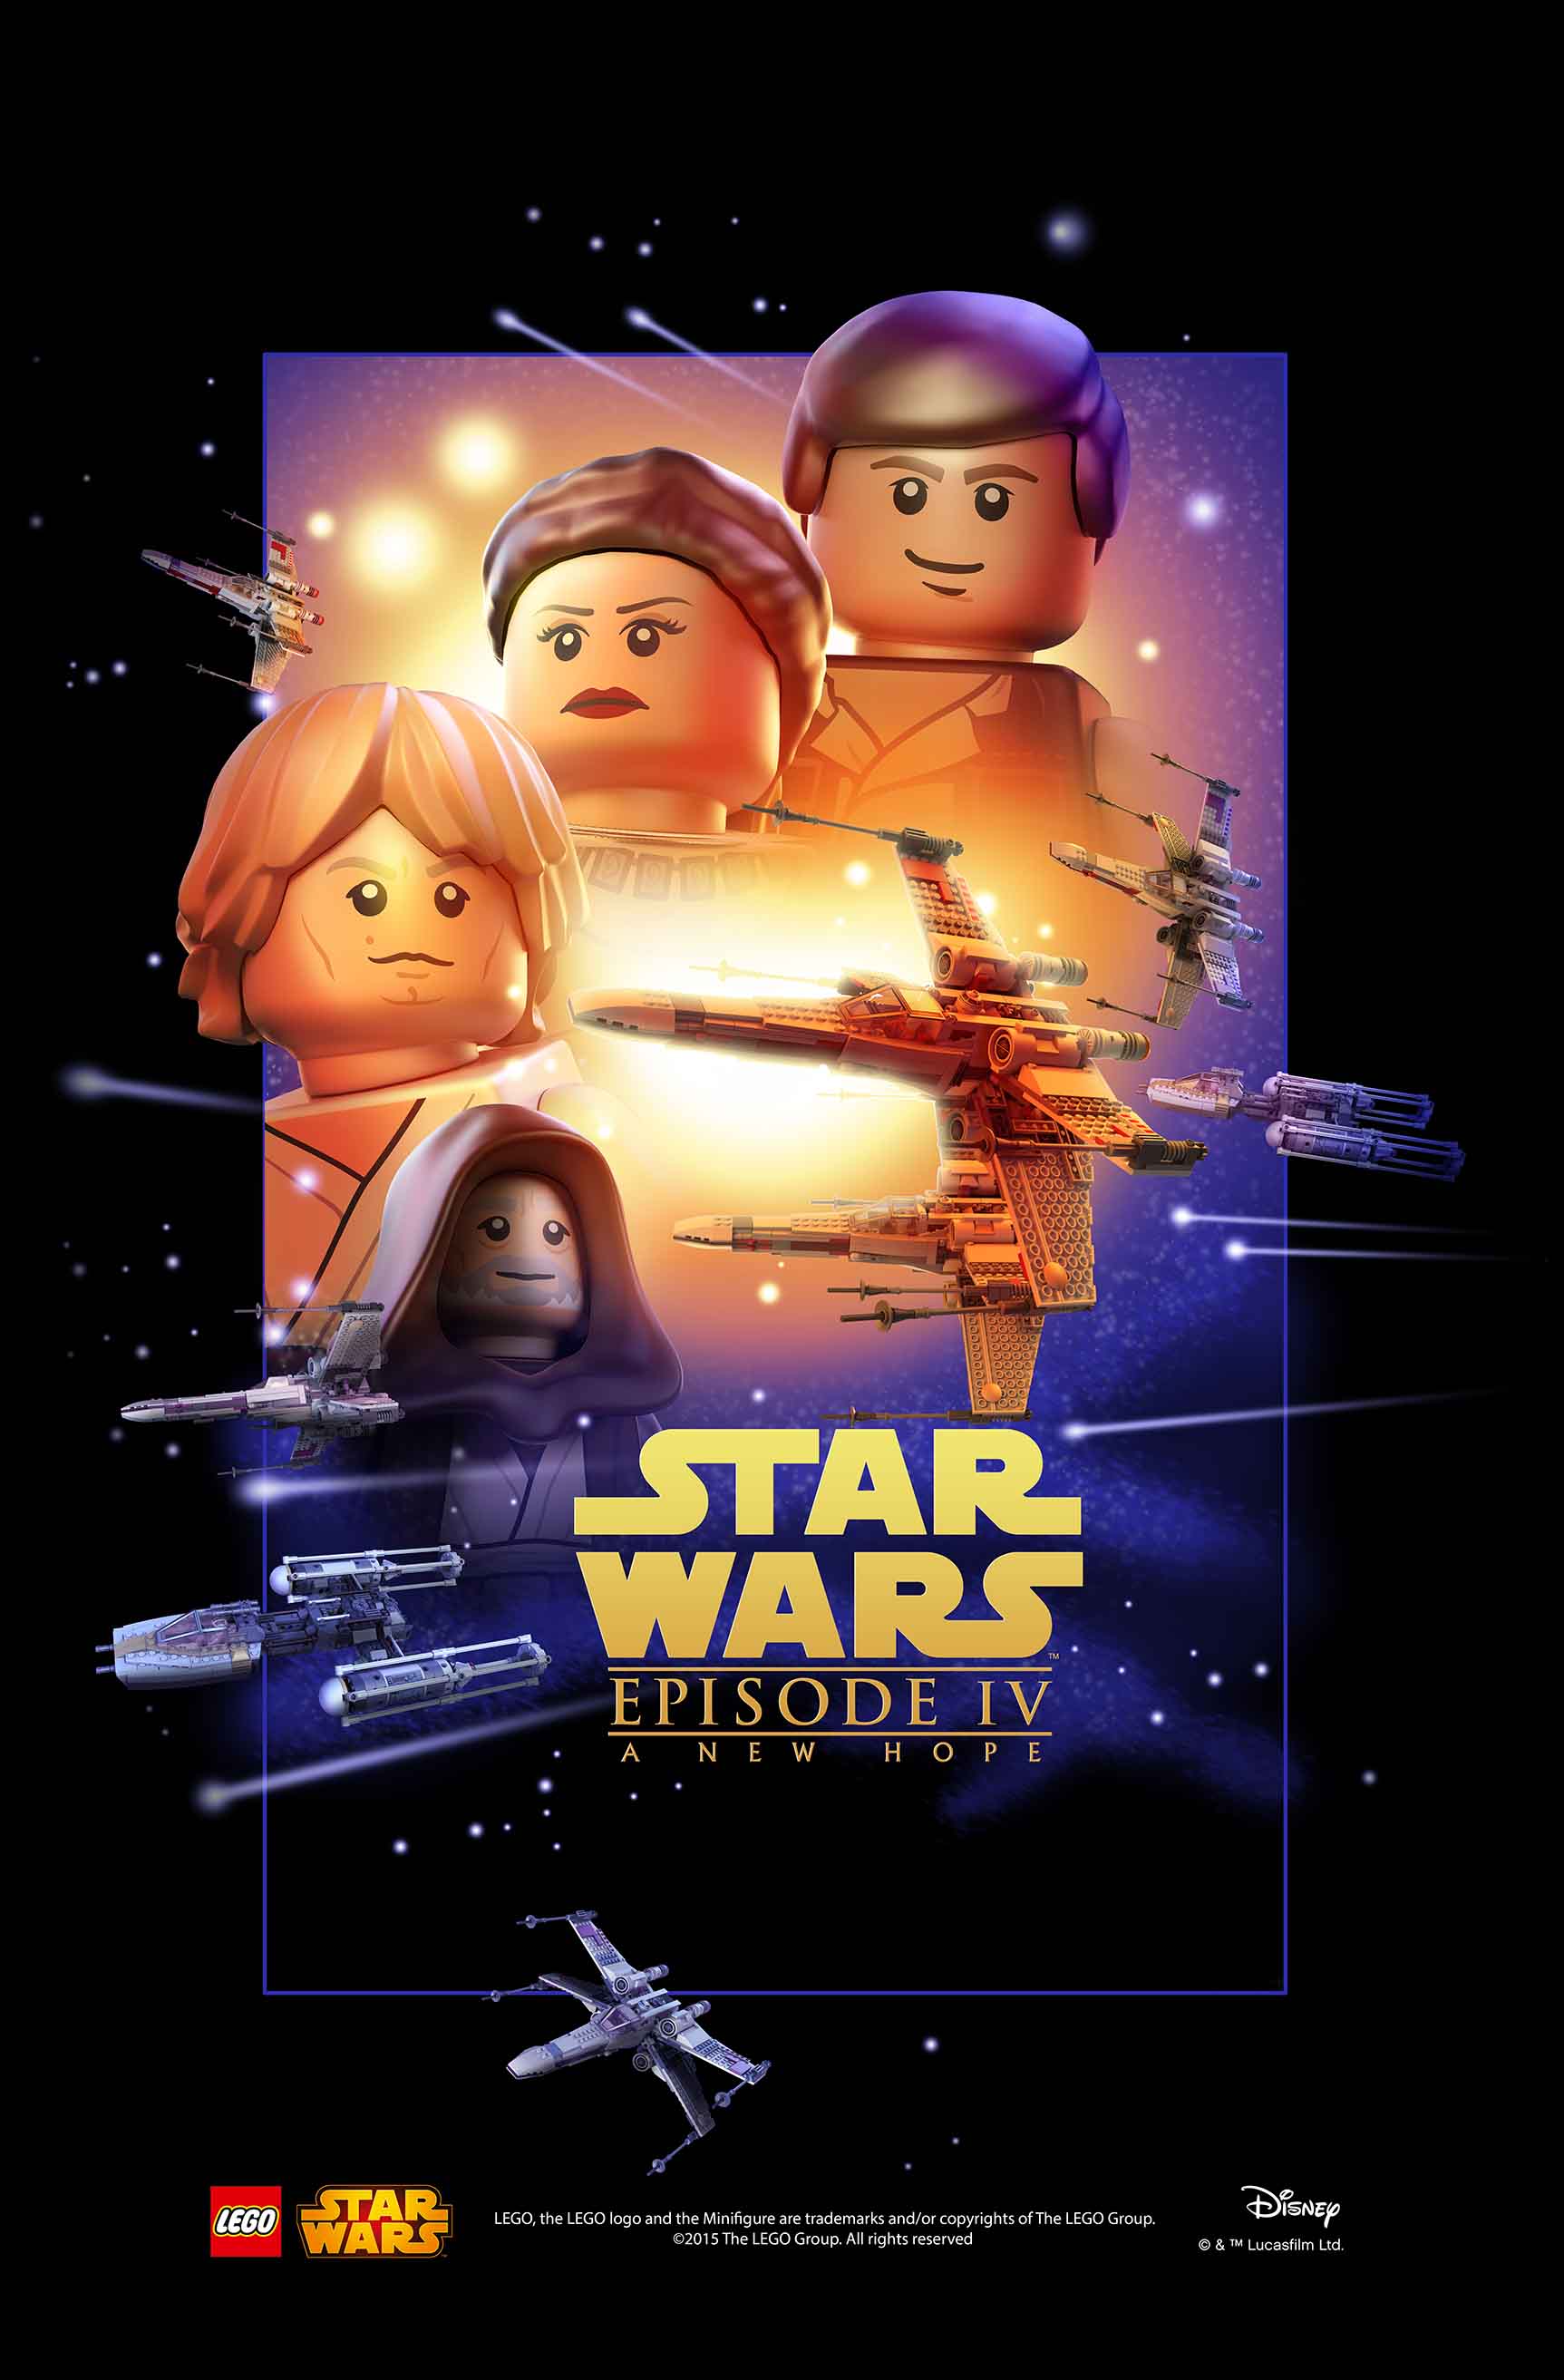 Star Wars Posters Recreated With LEGO - FBTB